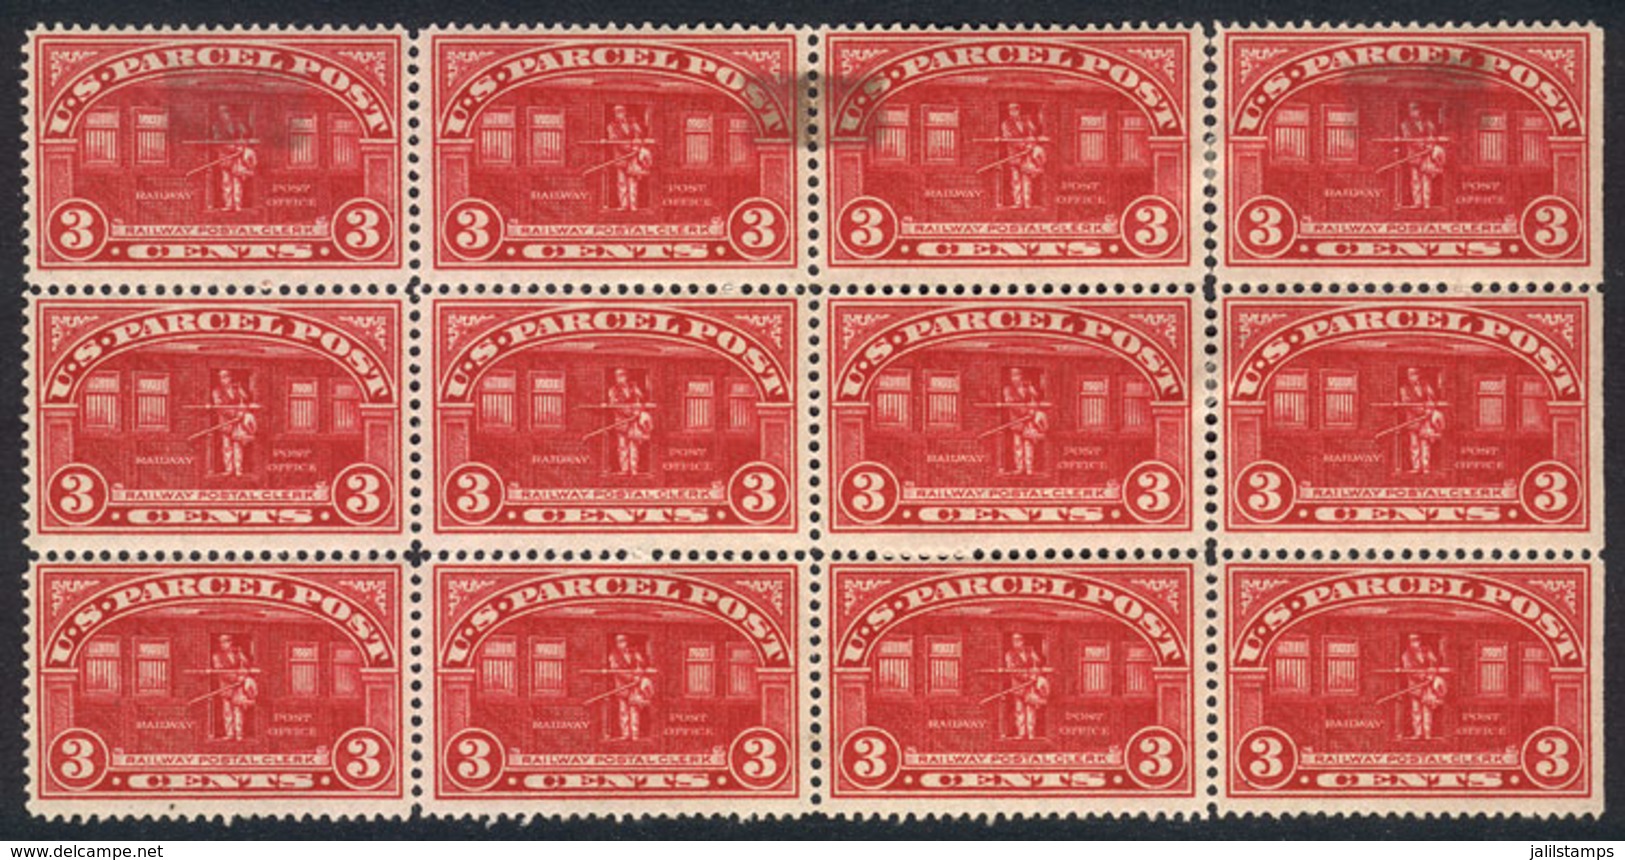 UNITED STATES: Sc.Q3, 1913 3c. Railway Postal Clerk, Beautiful BLOCK OF 12, The 4 Top Stamps With Hinge Mark Stains, The - Paquetes & Encomiendas